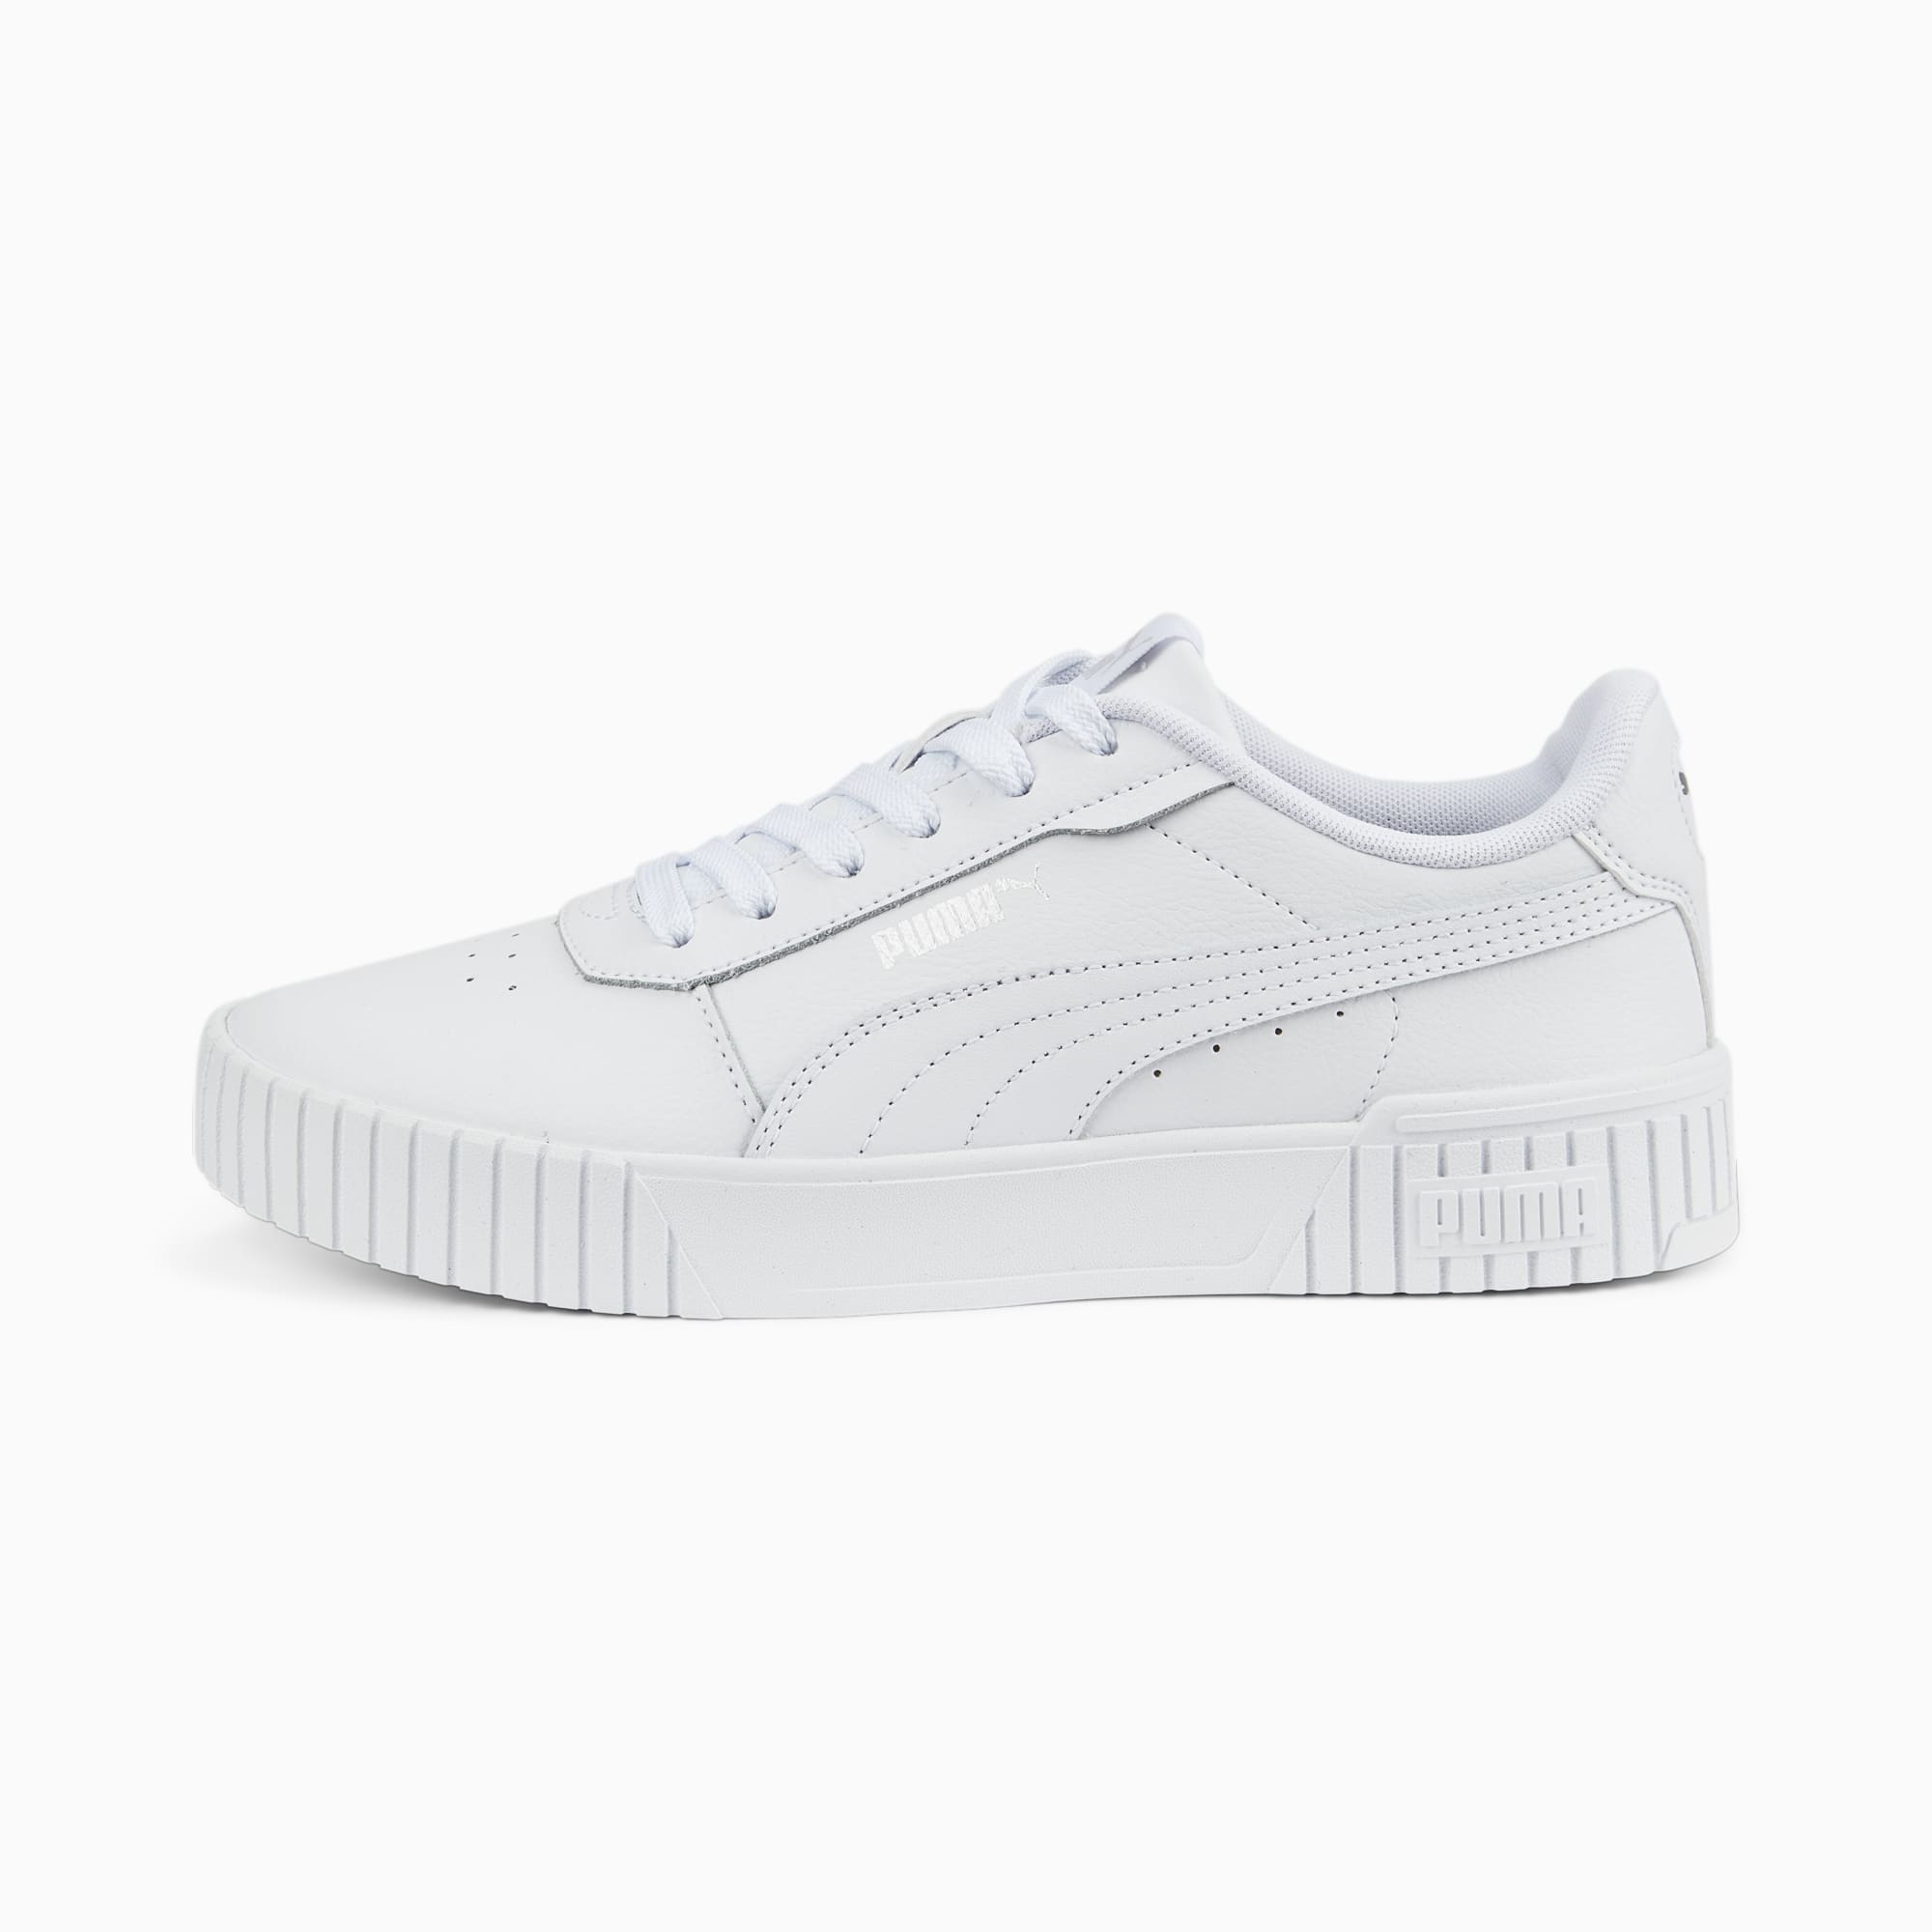 PUMA Chaussure Sneakers Carina 2.0 Femme, Blanc/Argent